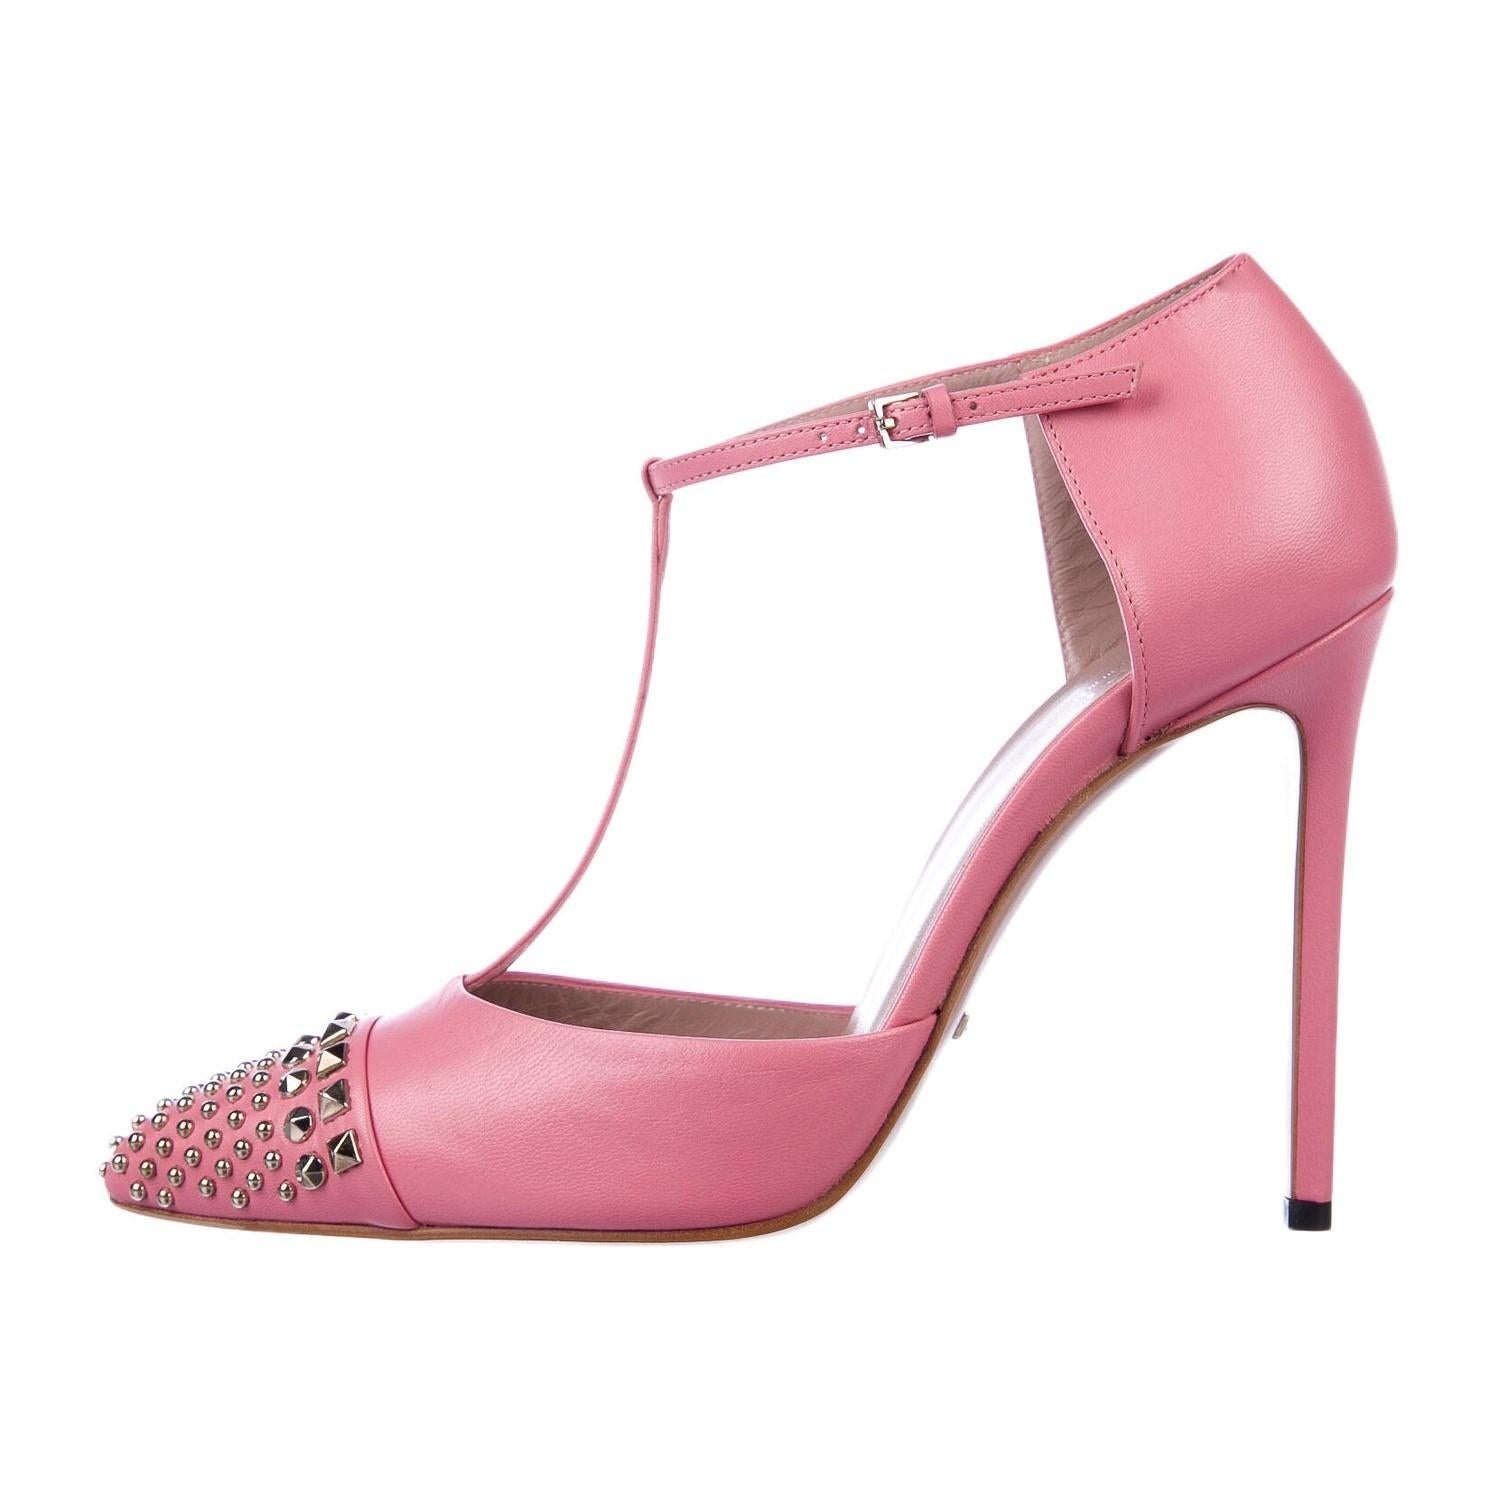 Gucci
Brand New
Stunning Blush Pink Studded Pumps
Soft Napa Leather
Size: Euro 39
Silver Studded
Pointed Toe
Adjustable Ankle Strap
Leather Insole
4.5